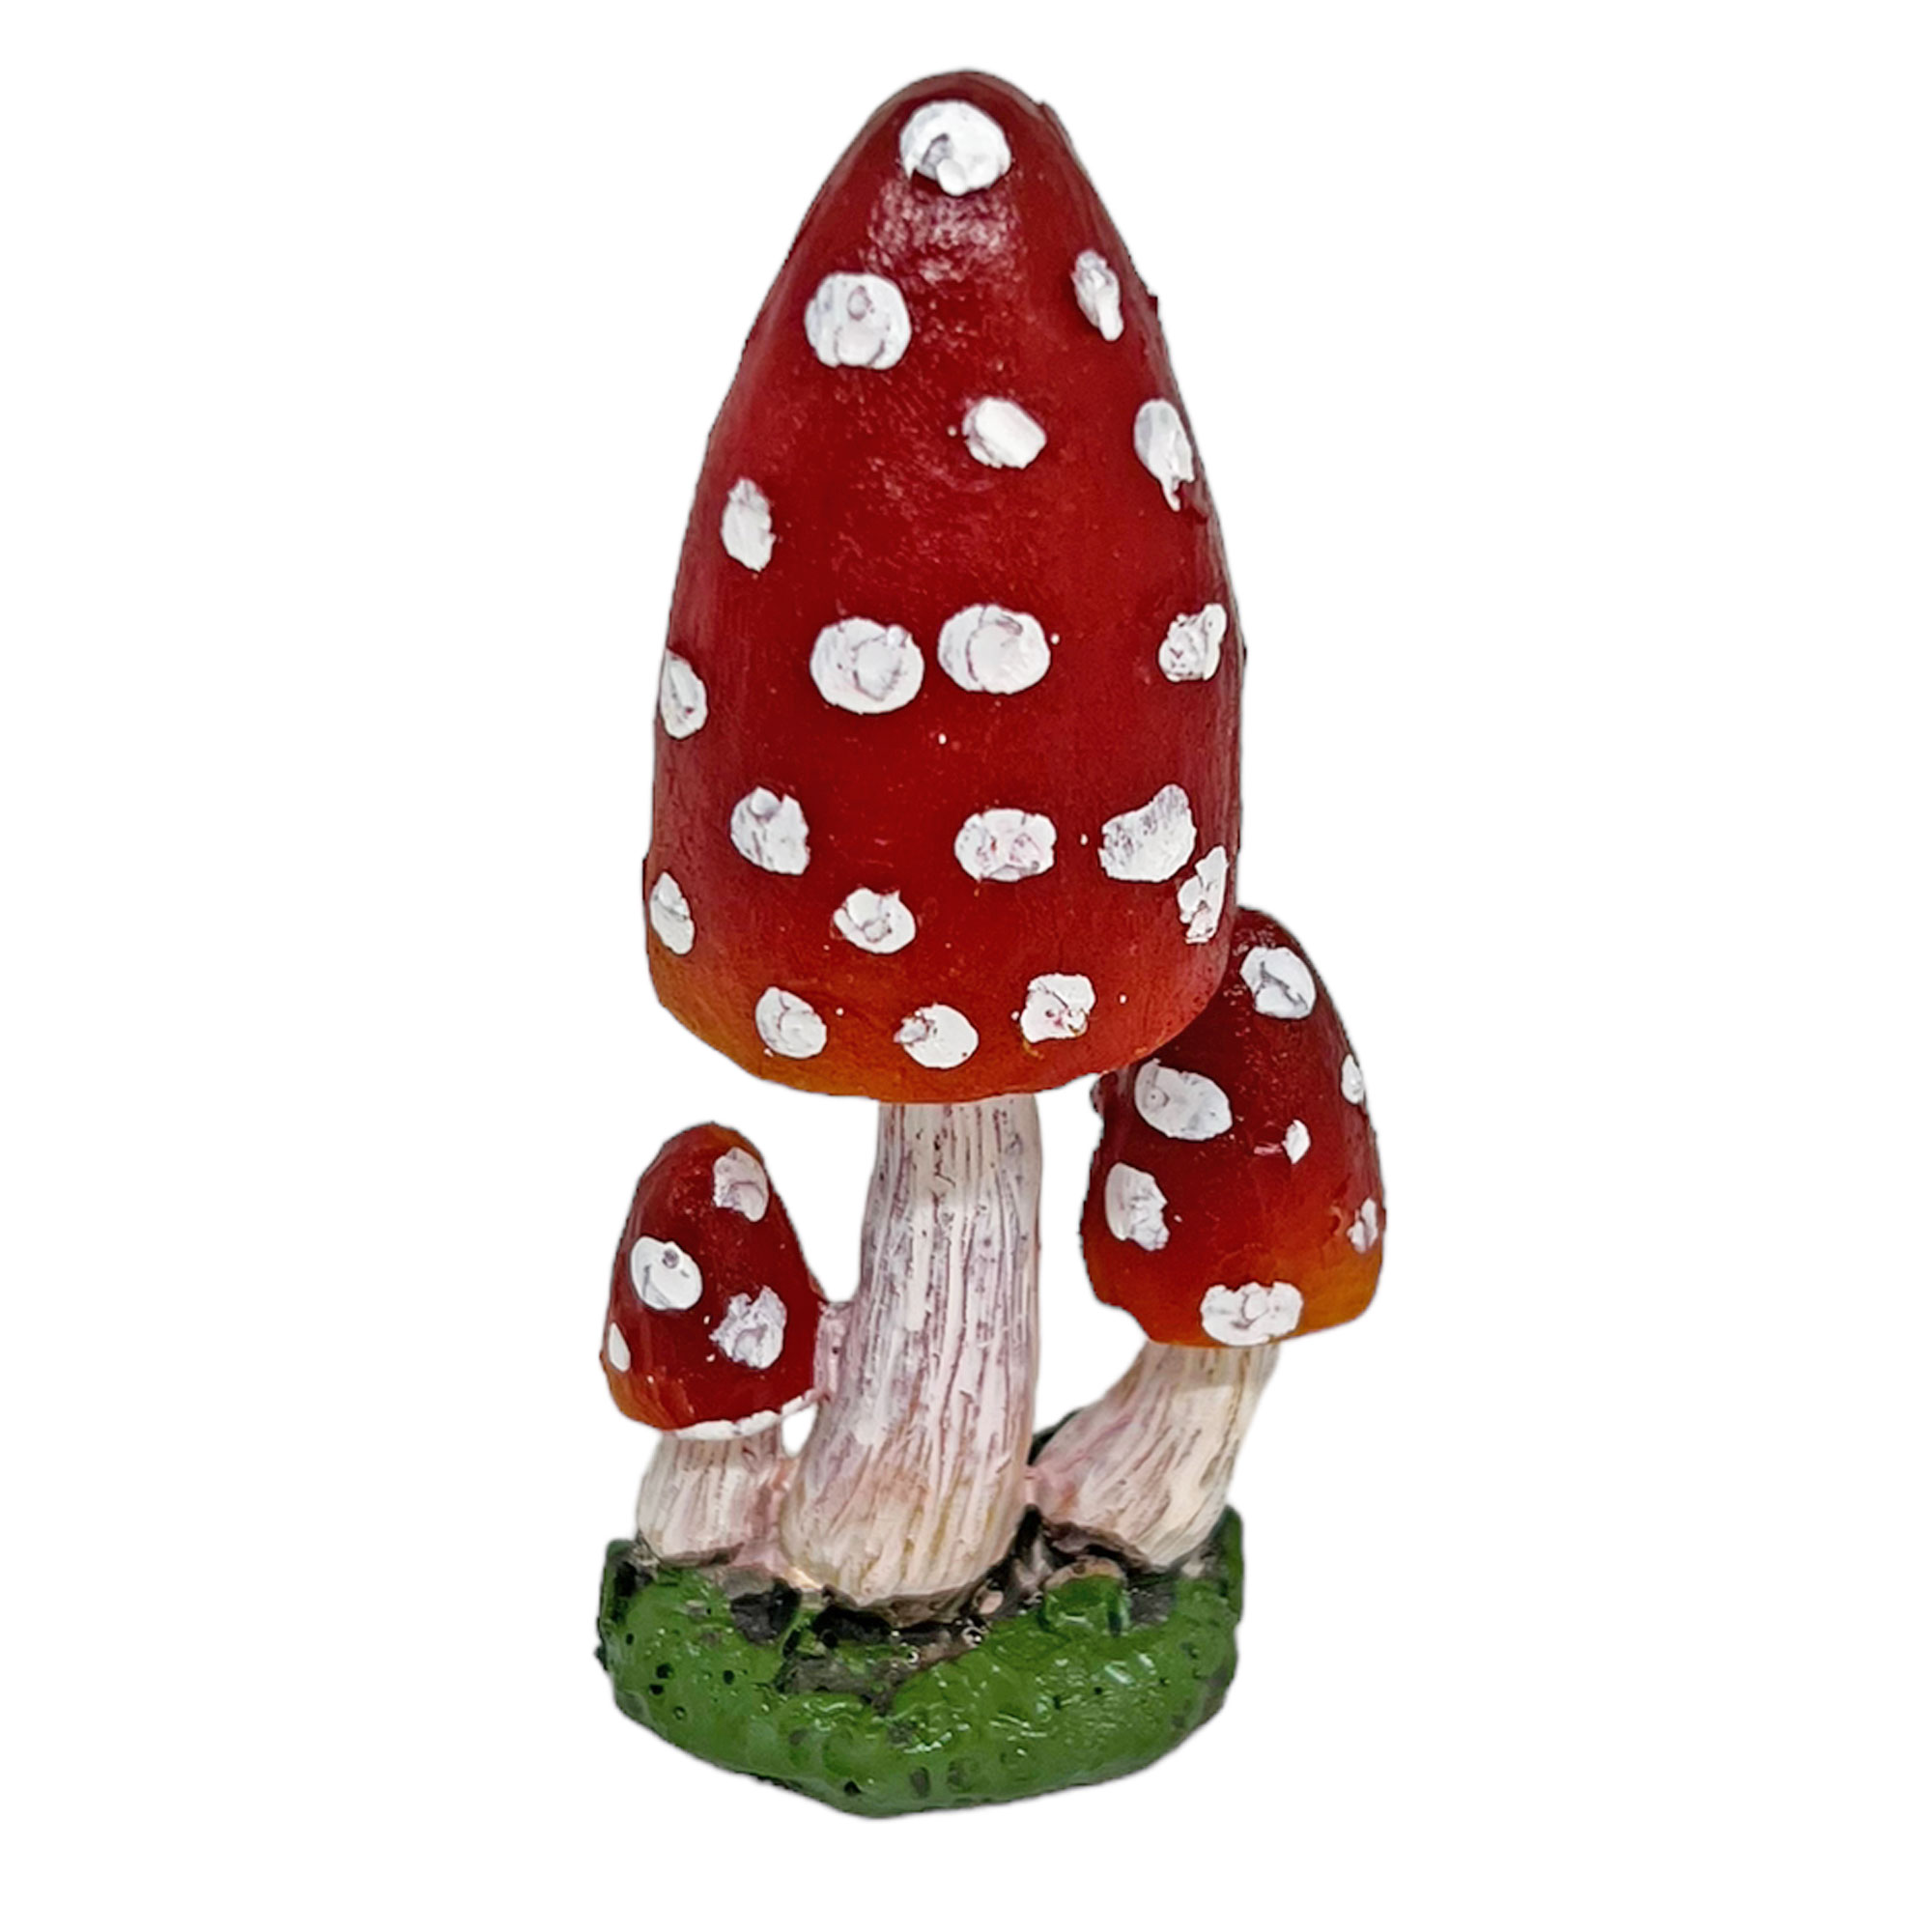 Wooden Toadstool Trio and Plinth Garden Sculpture Buy Wooden Mushrooms and  Toadstools (Sculptural) Wooden Mushroom Garden Ornament and Sculpture Toads